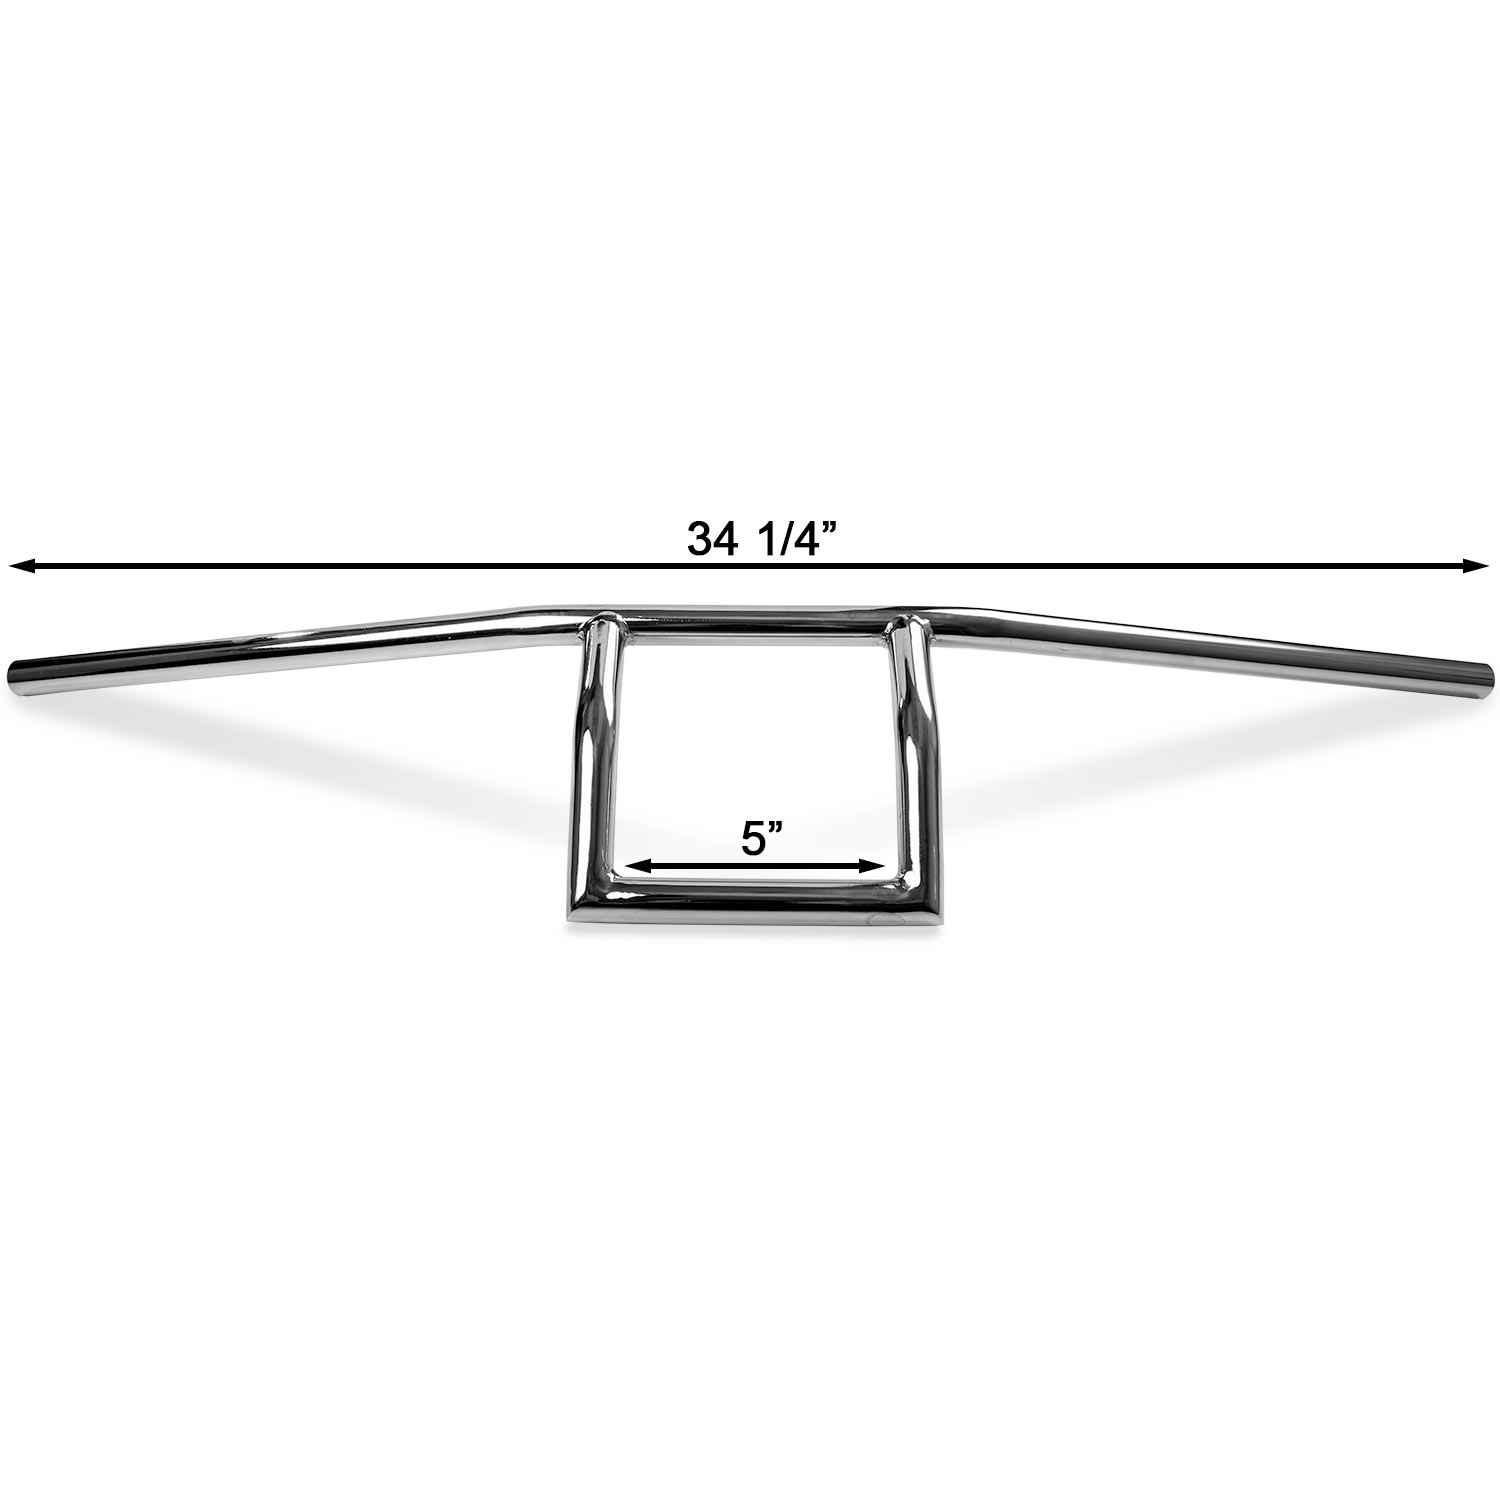 Krator Motorcycle Handlebar 7/8" Chrome Box Window Attack Style Compatible with Yamaha Royal Star Venture Classic Royale Deluxe